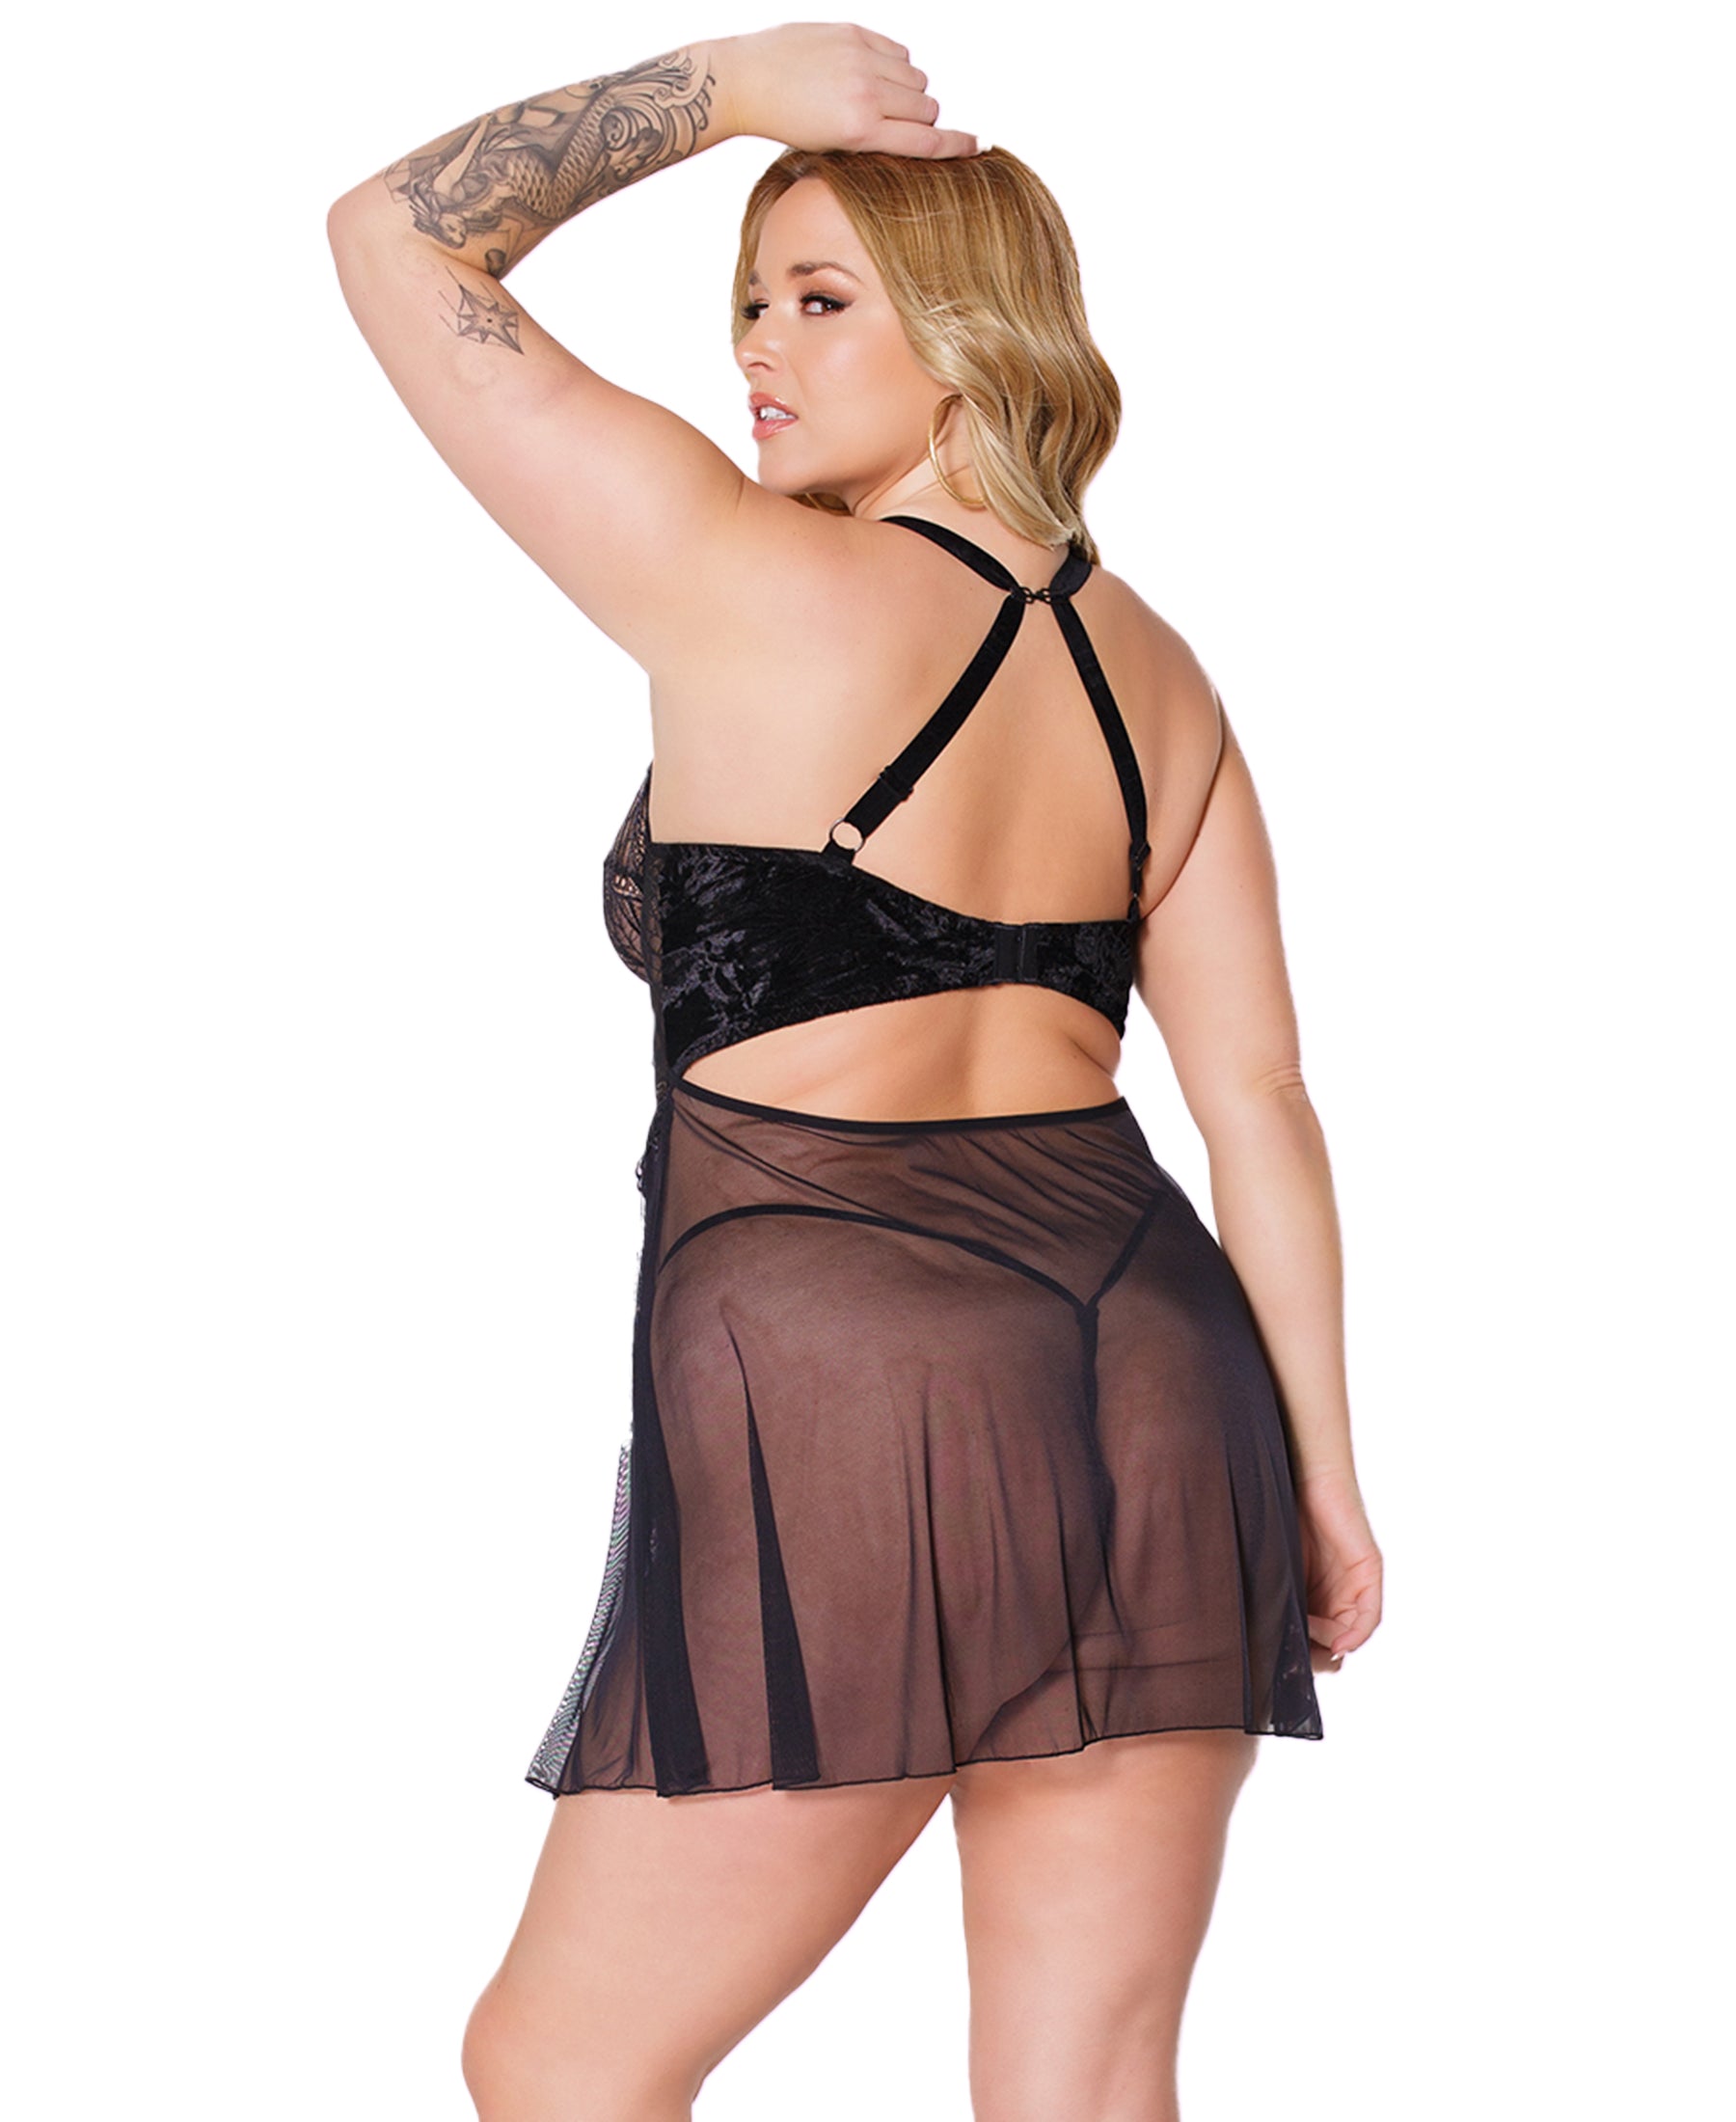 22317 plus Babydoll & G-string rear view clipped